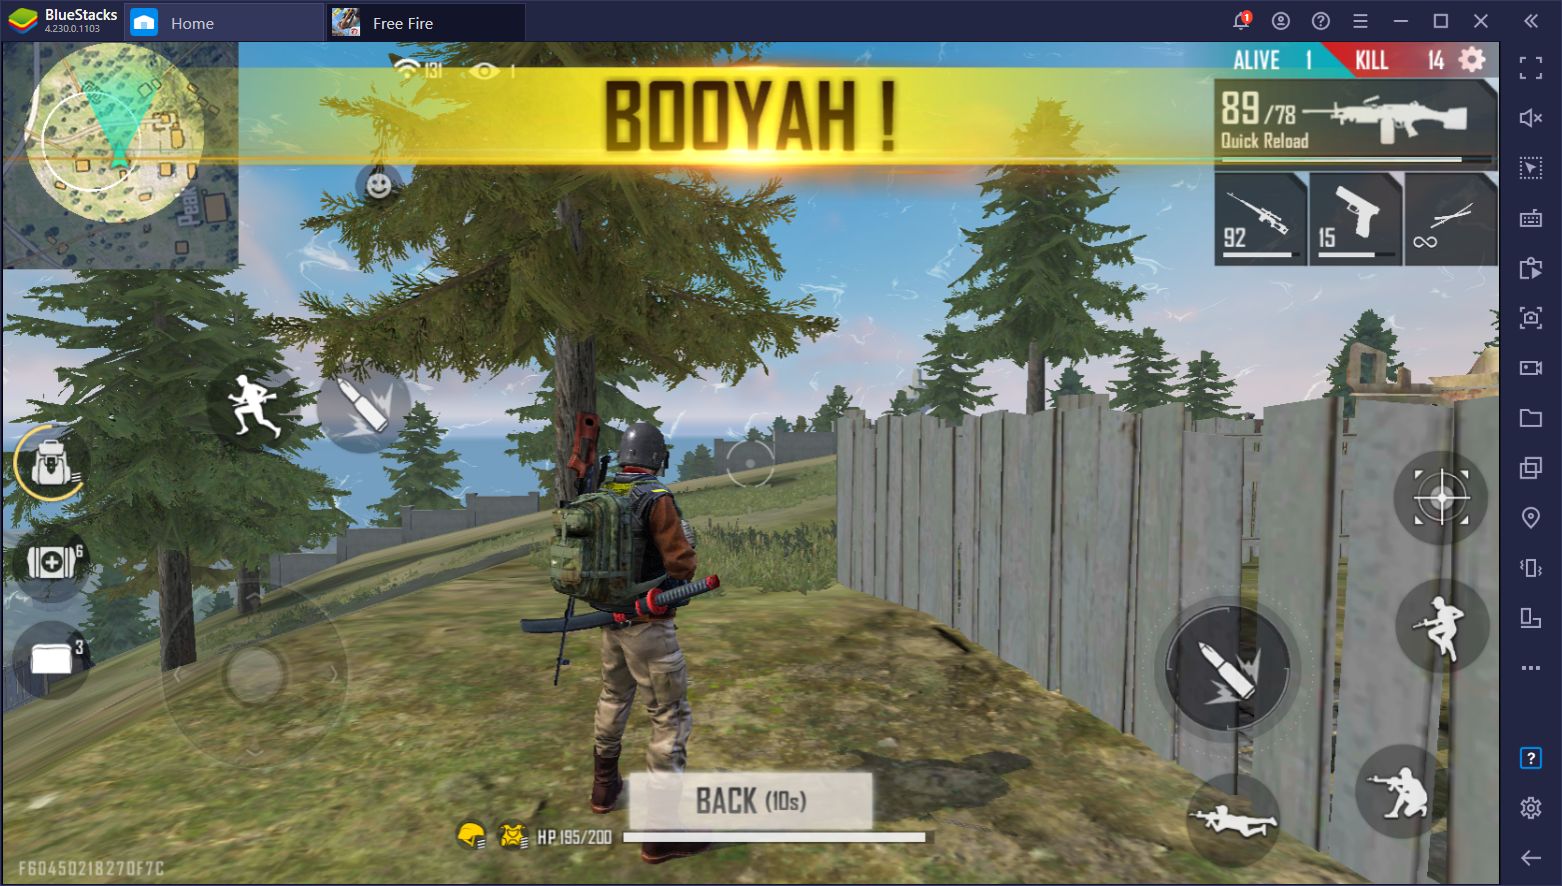 Garena Free Fire - Everything You Need to Know About the Most Popular Mobile Battle Royale Game